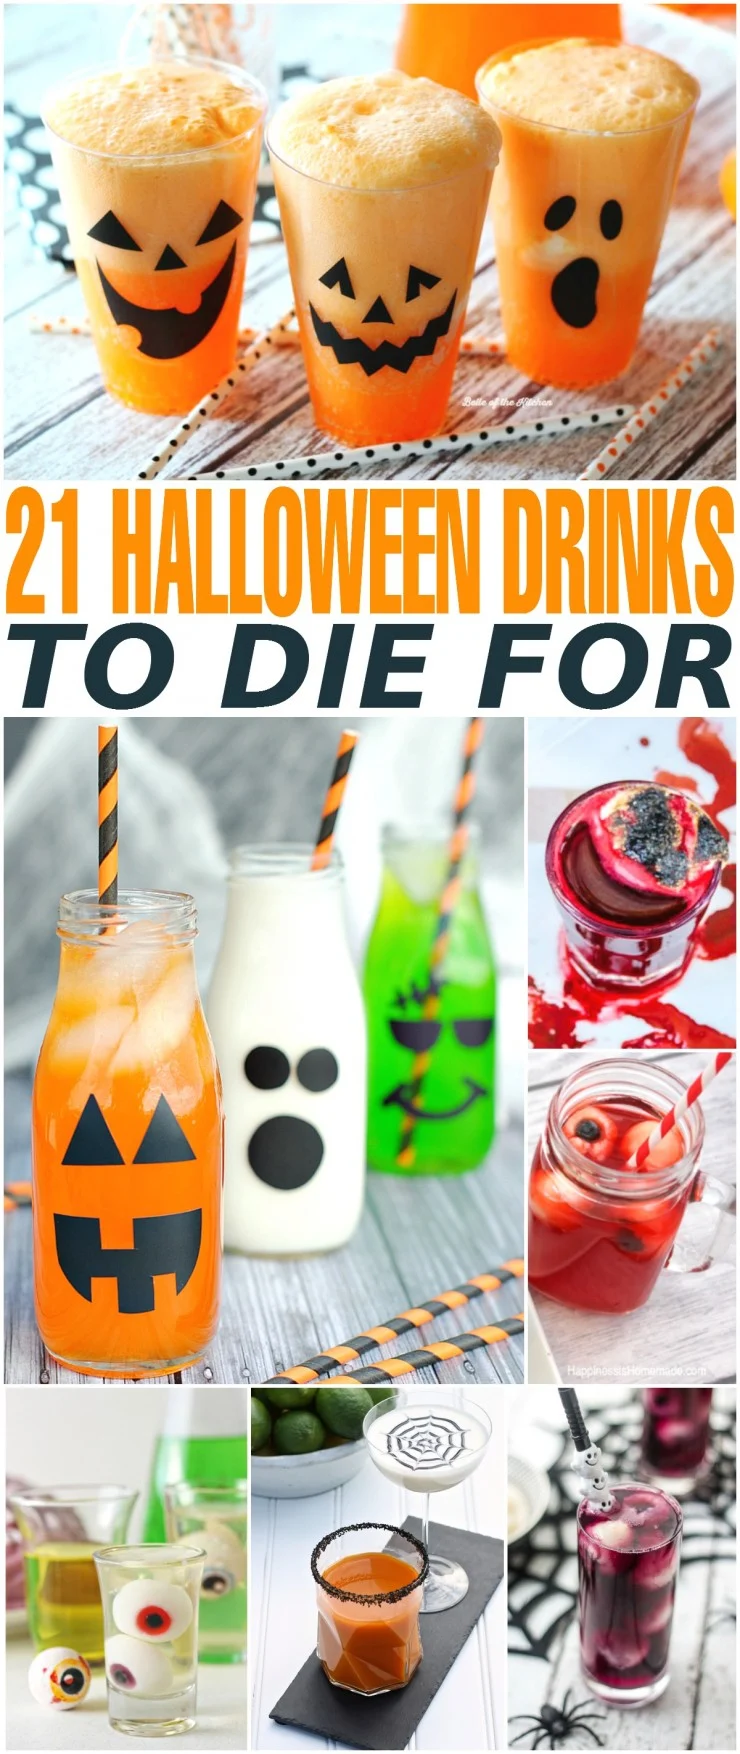 Here are 21 Halloween drinks to die on All Hallows' Eve - serve at a Halloween party or just for a fun spooky treat for your family.